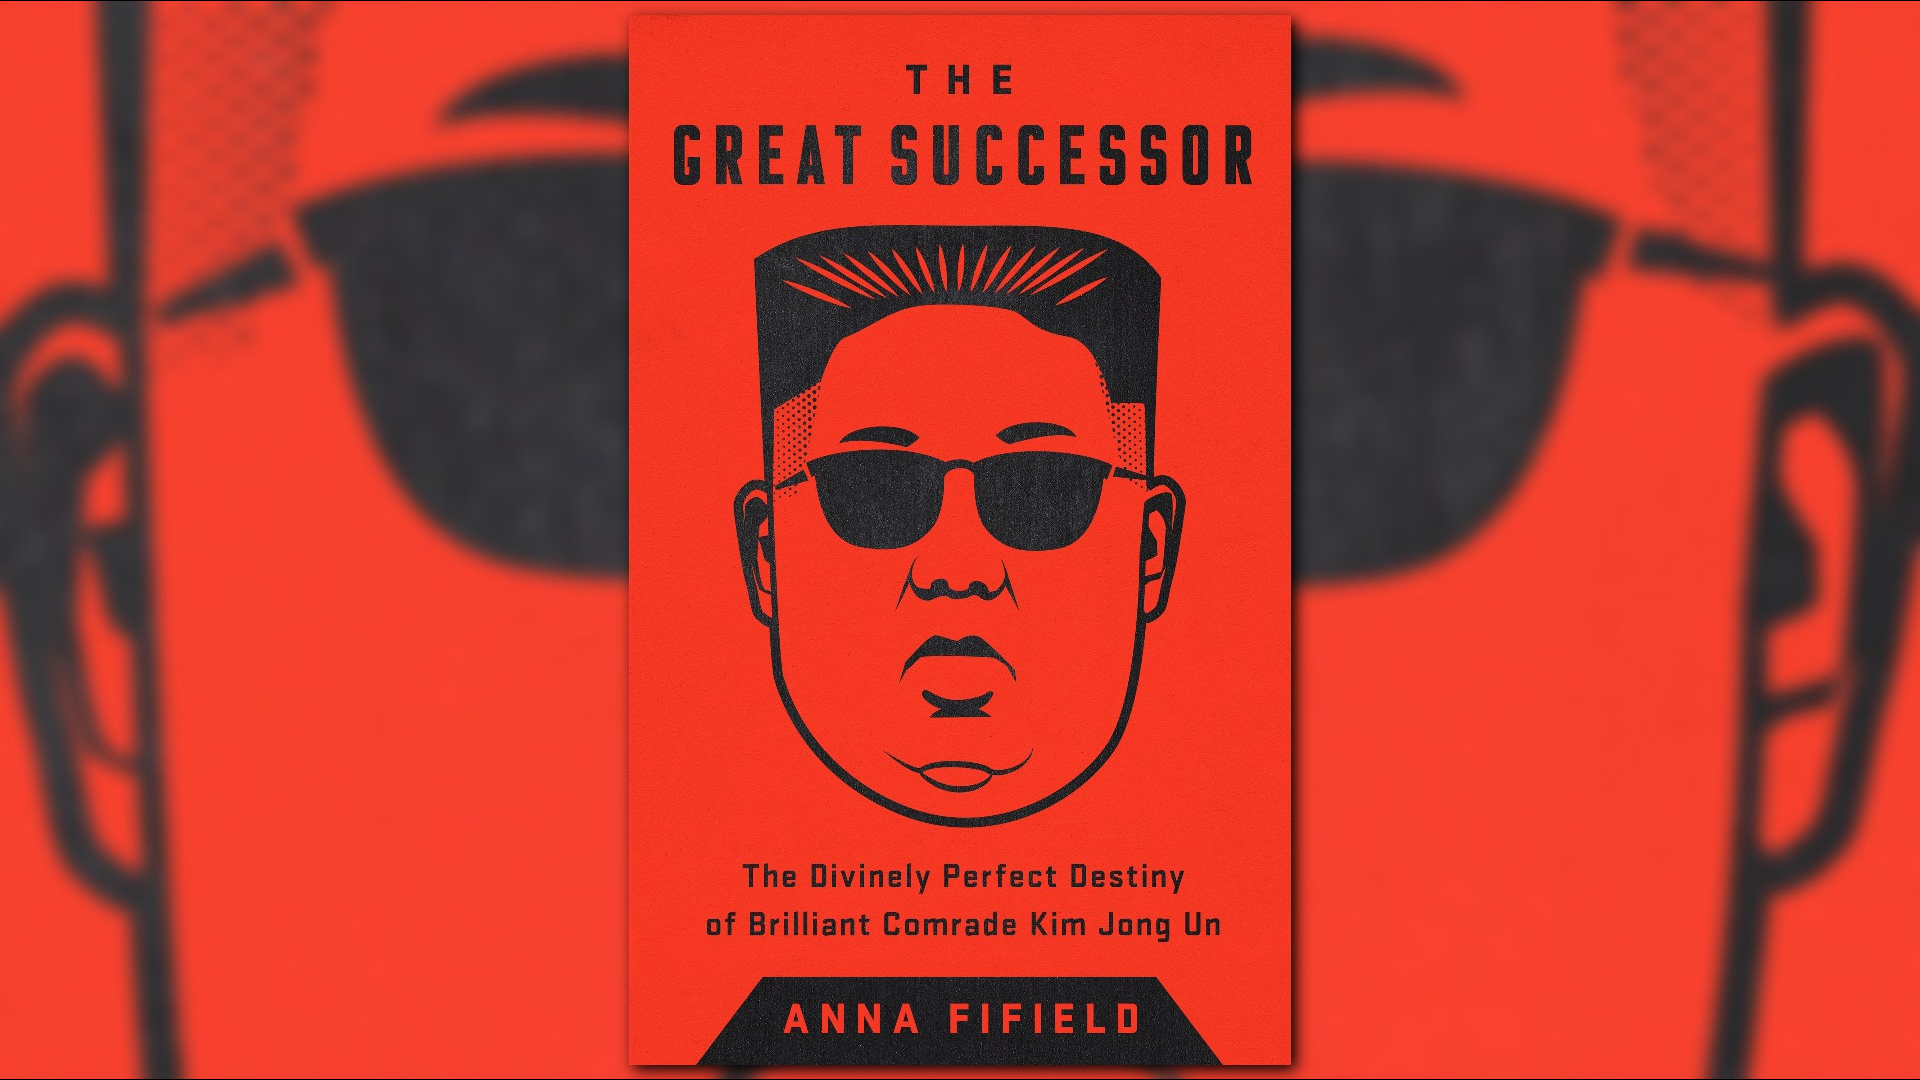 The Great Successor was written by Washington Post Beijing bureau chief Anna Fifield, who over time had exclusive access to many in Kim's inner circle.